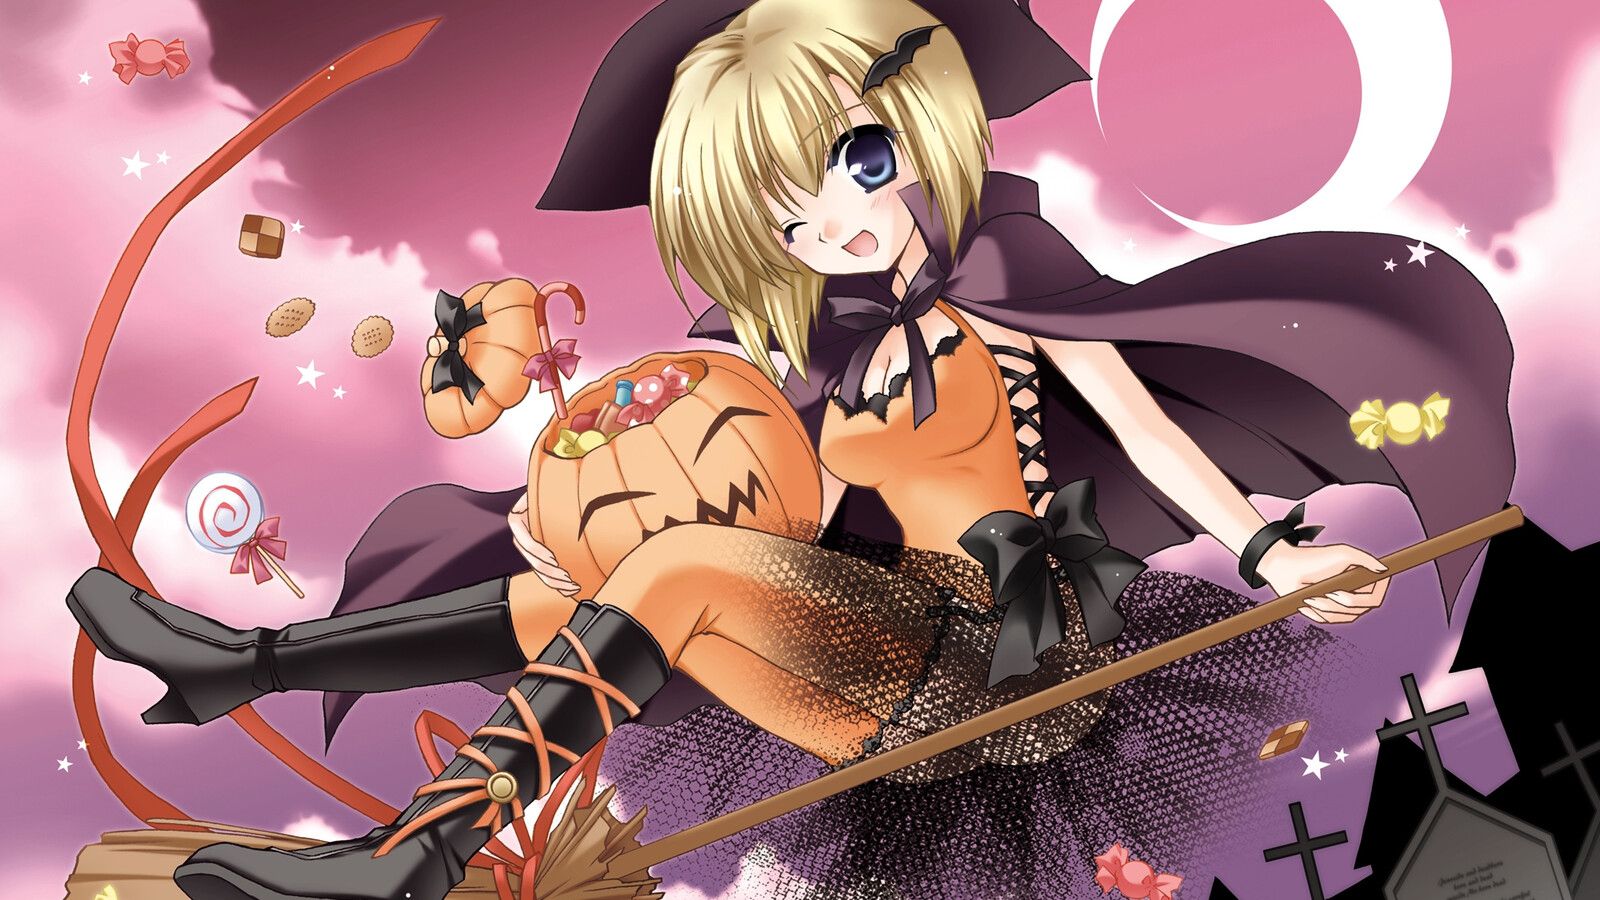 A girl witch on a broom anime wallpaper